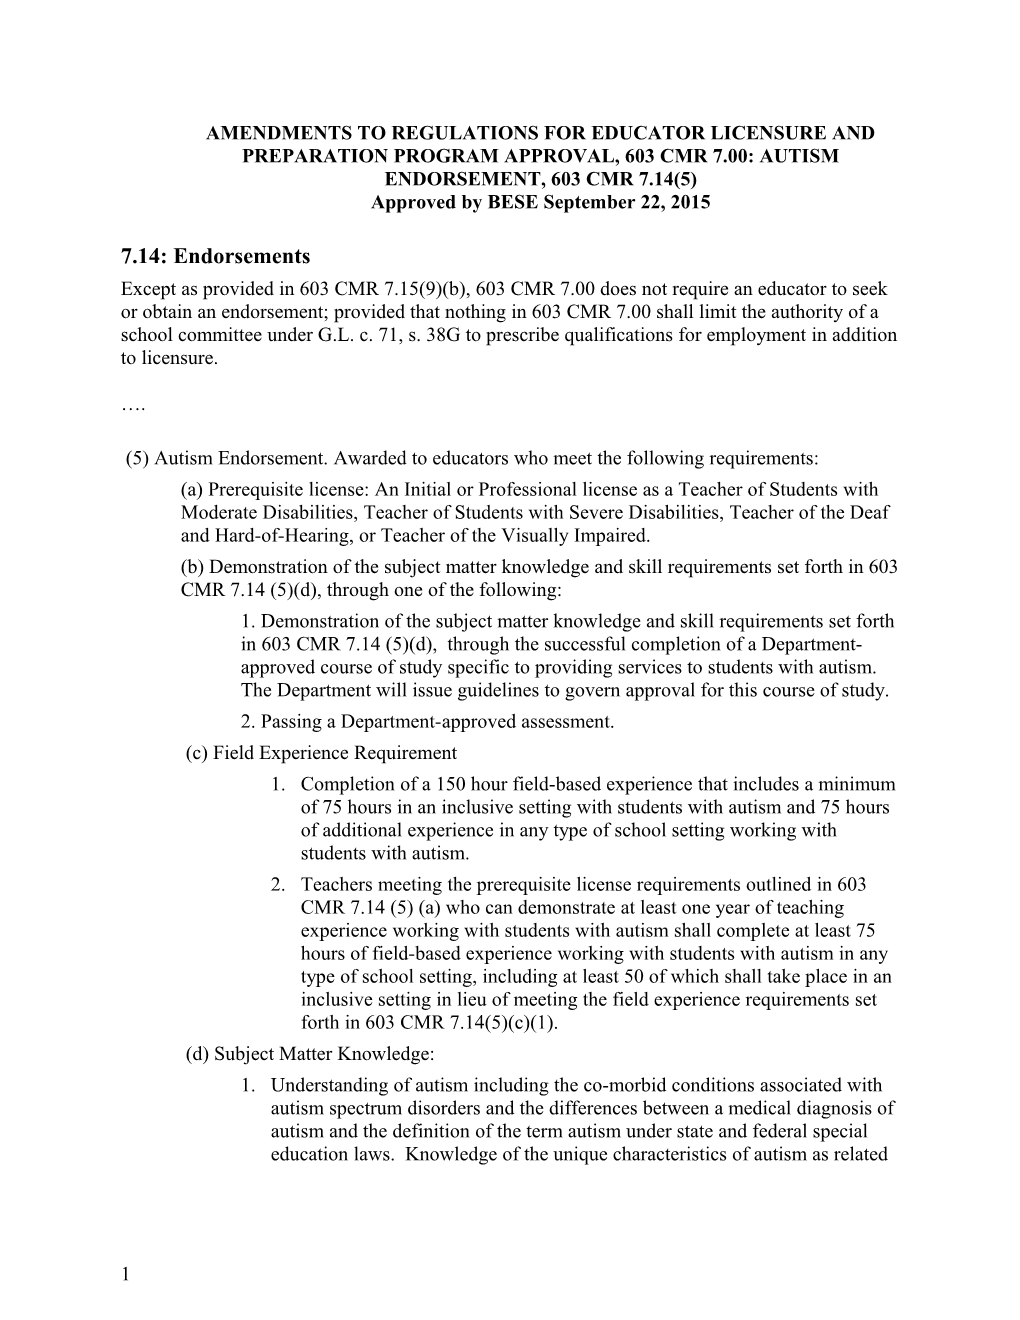 Proposed Draft Regulations for Educator Licensure and Preparation Program Approval, 603